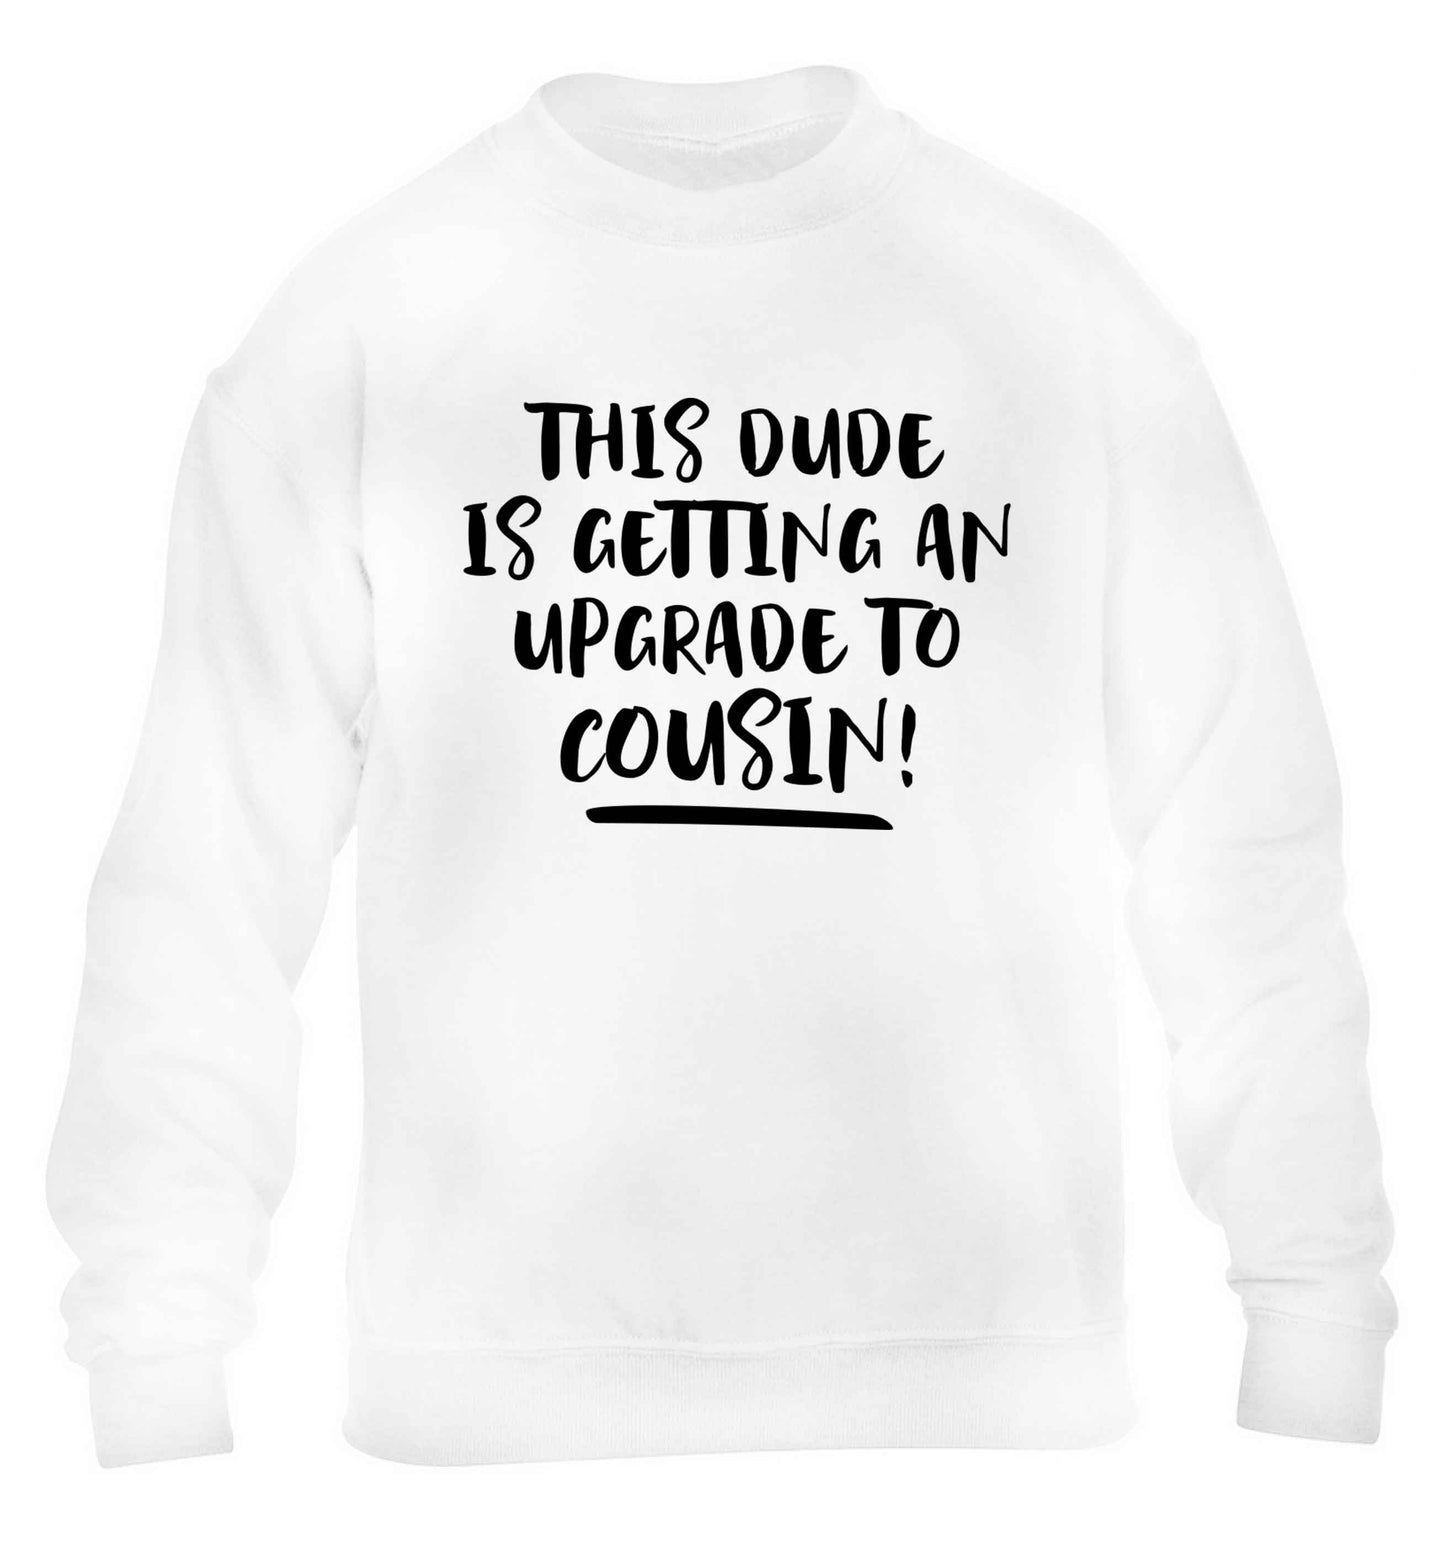 This dude is getting an upgrade to cousin! children's white sweater 12-13 Years